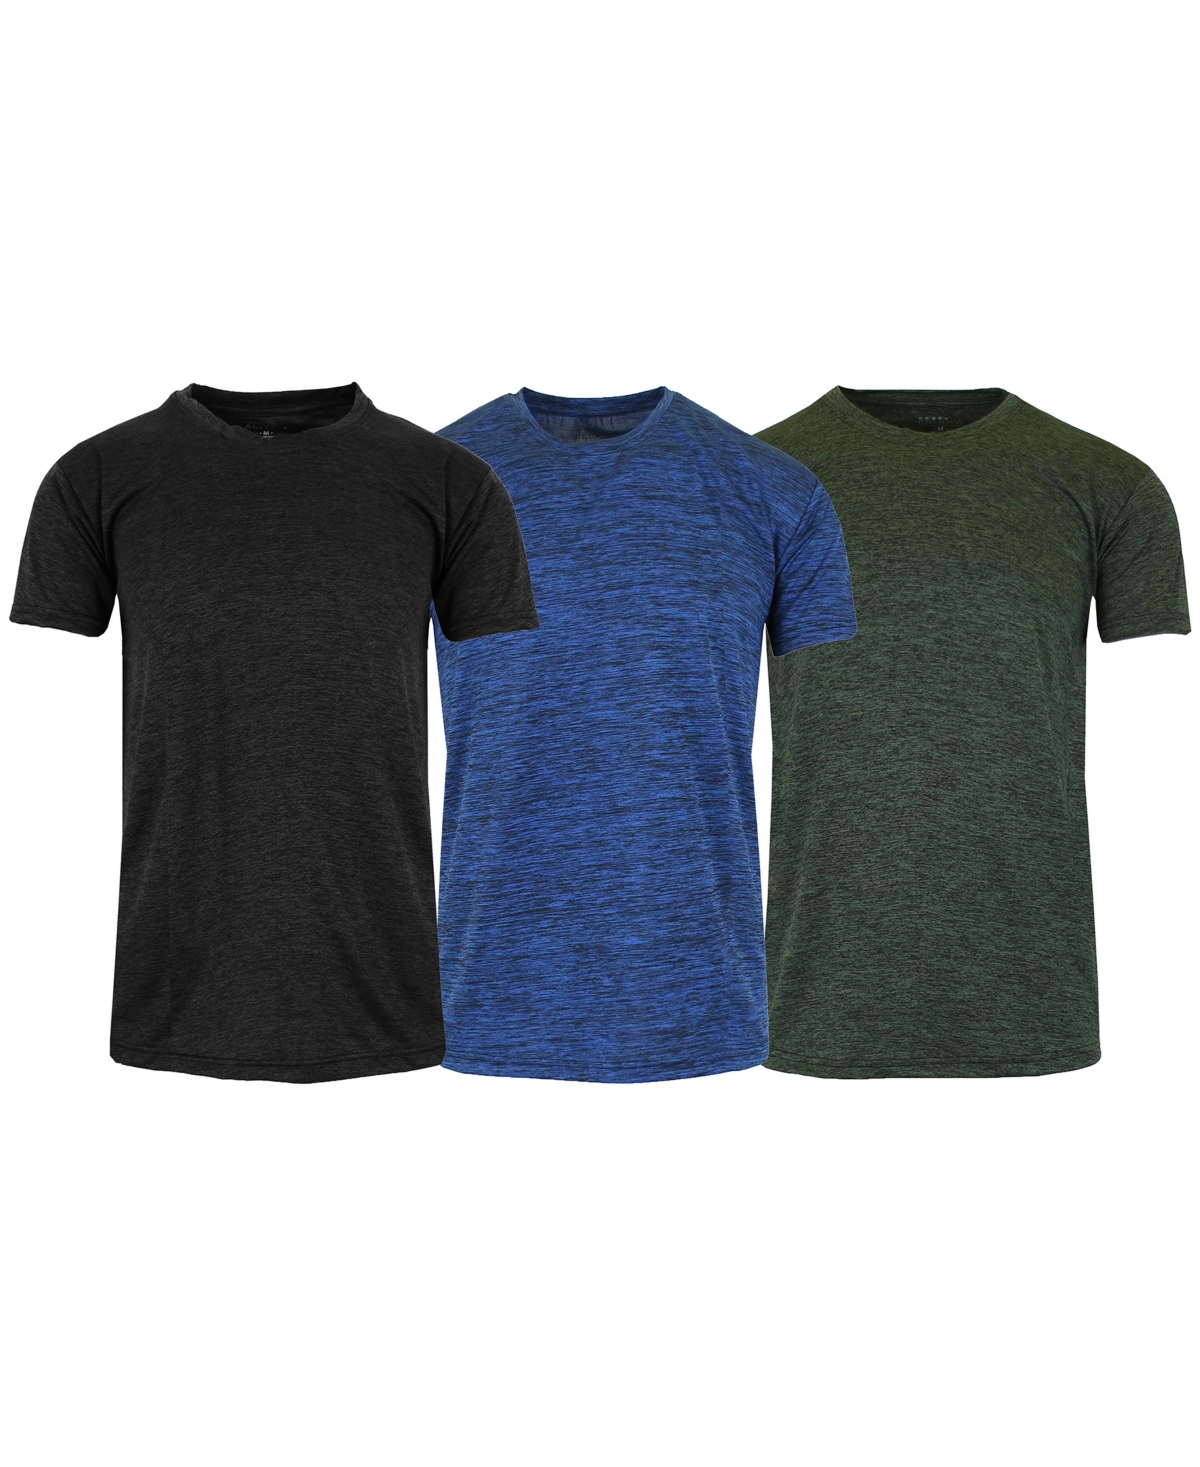 Galaxy By Harvic Men's Performance T-shirt, Pack Of 3 In Black,royal,olive